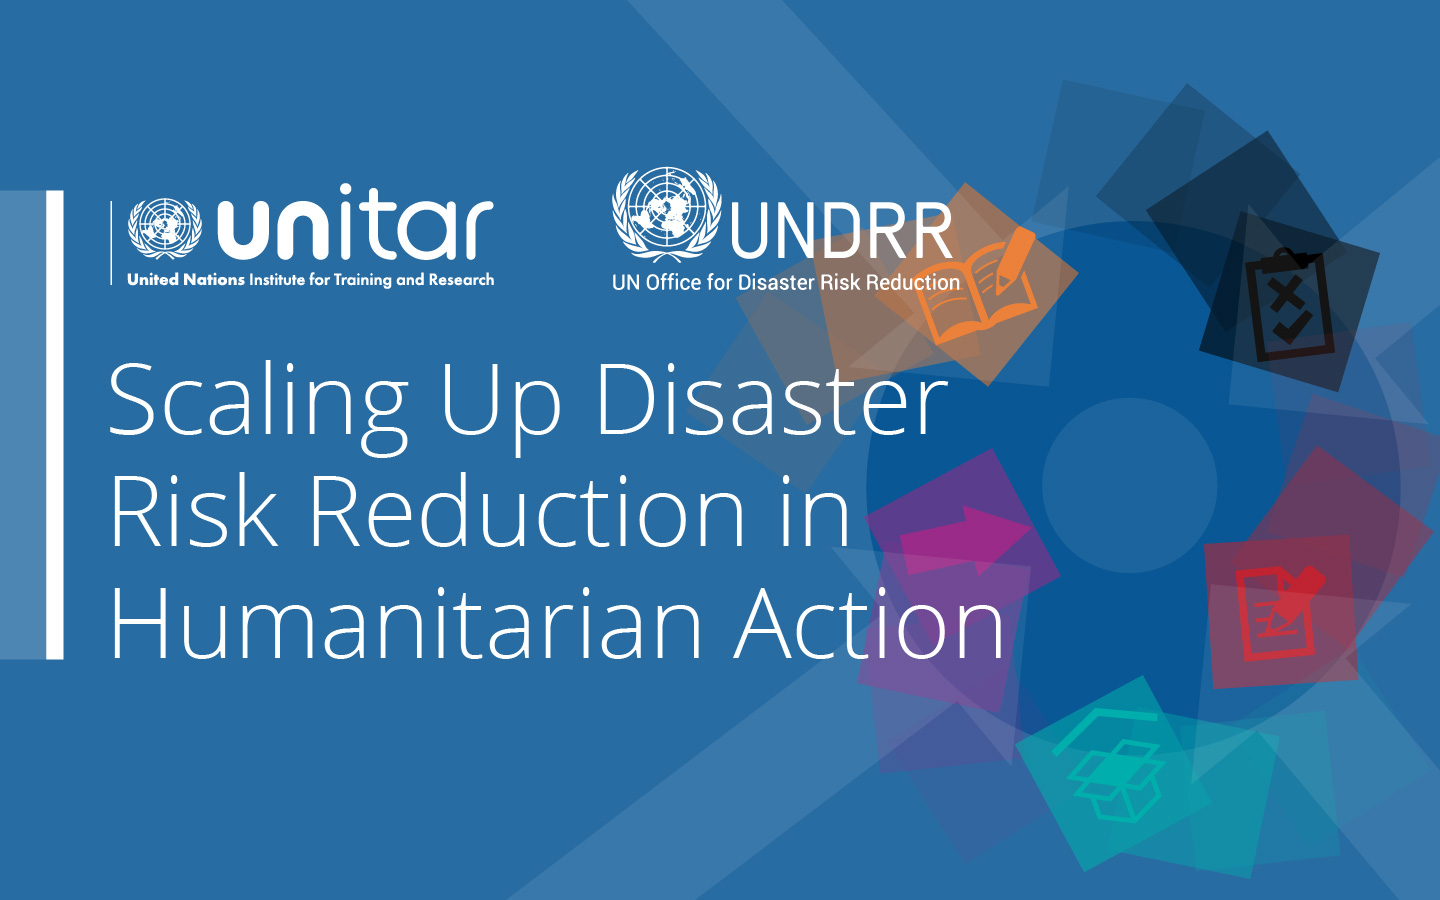 Checklist on Scaling Up Disaster Risk Reduction in Humanitarian Action